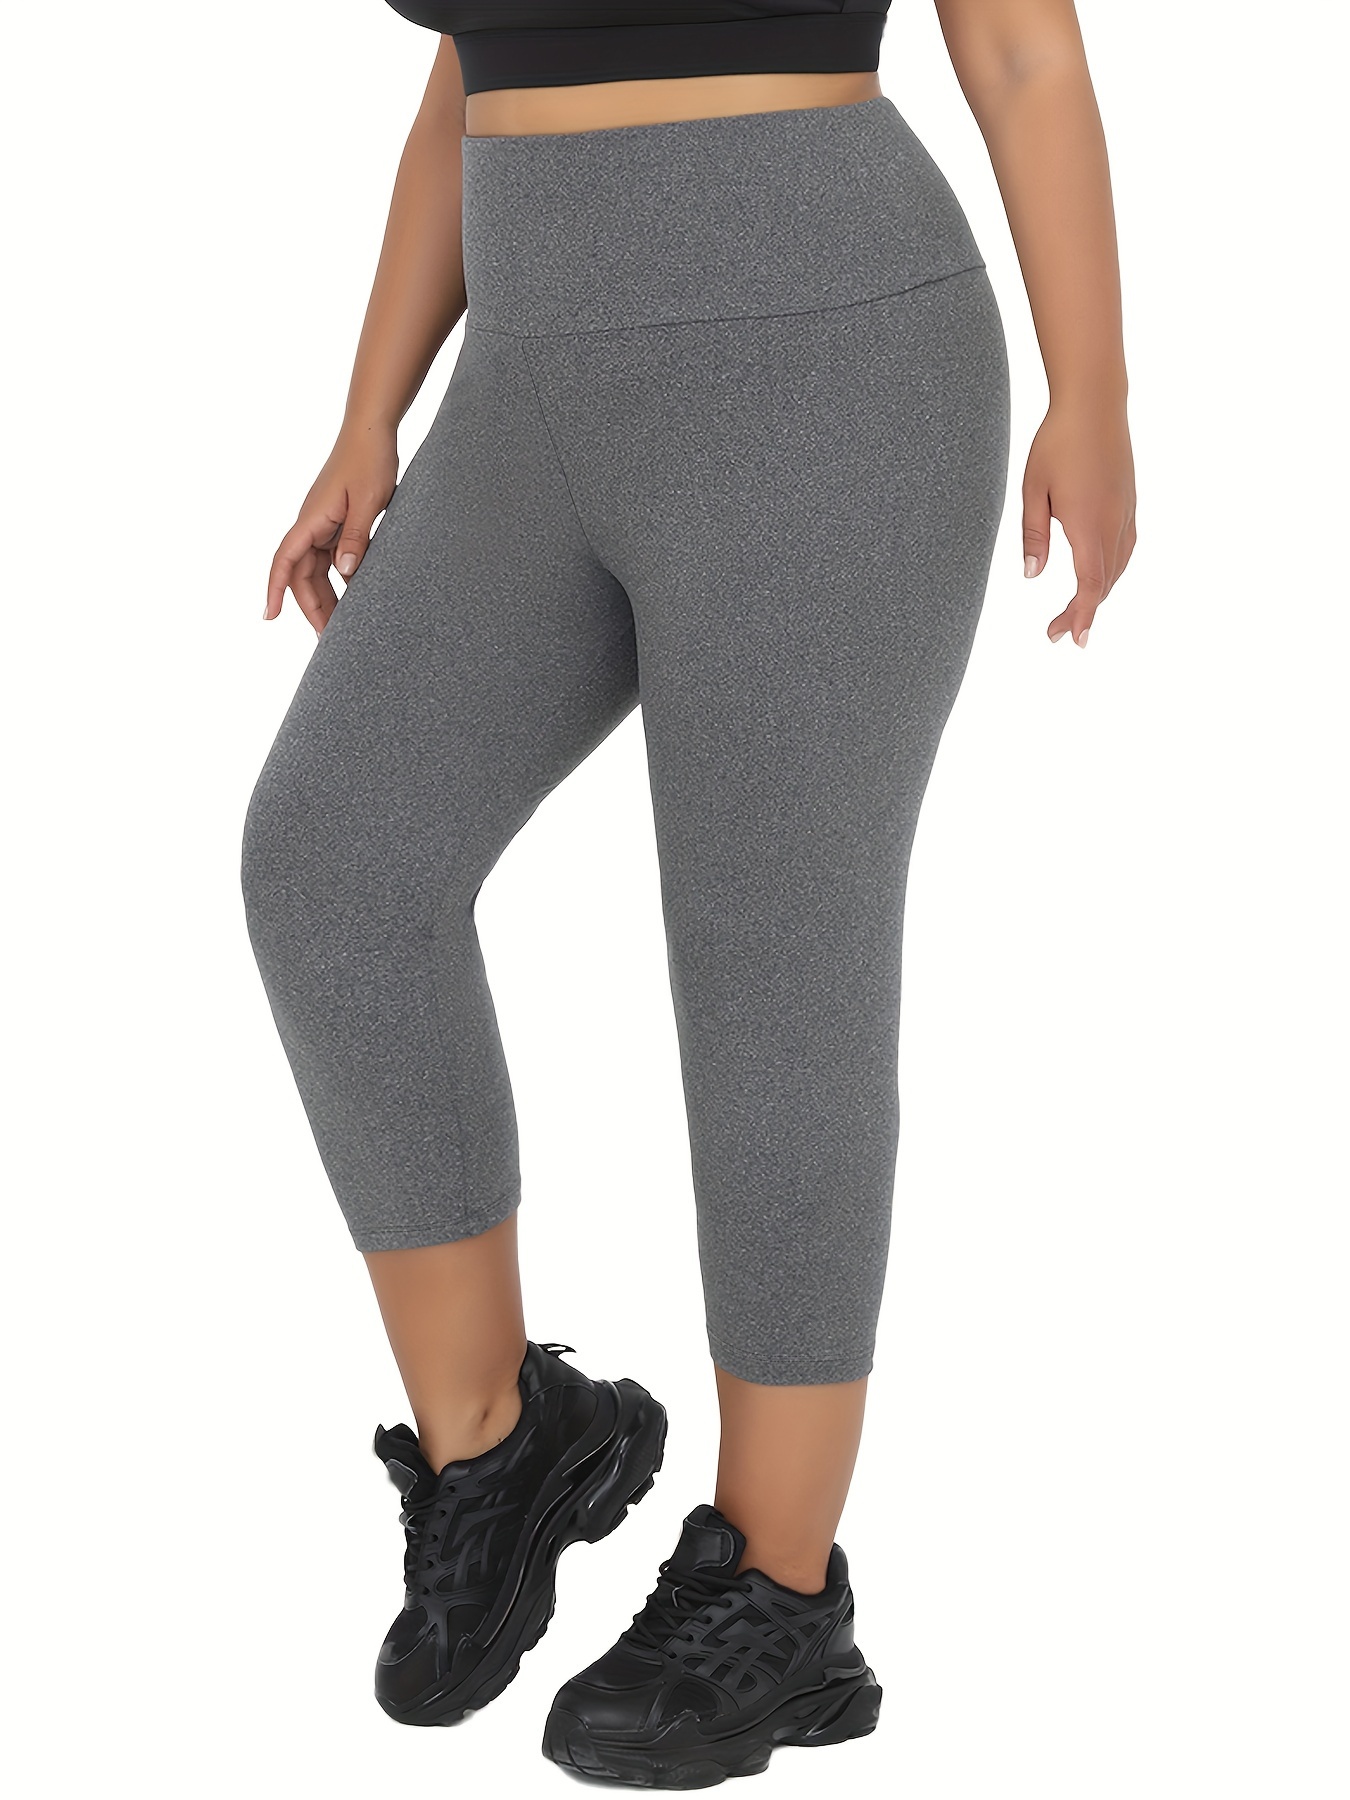 Breasted Tummy Control Sweat Tight Trousers, Sweat Shaping Pants, Women's  High Waist Tight Sports Fitness Pants Body Shaping Yoga Pants